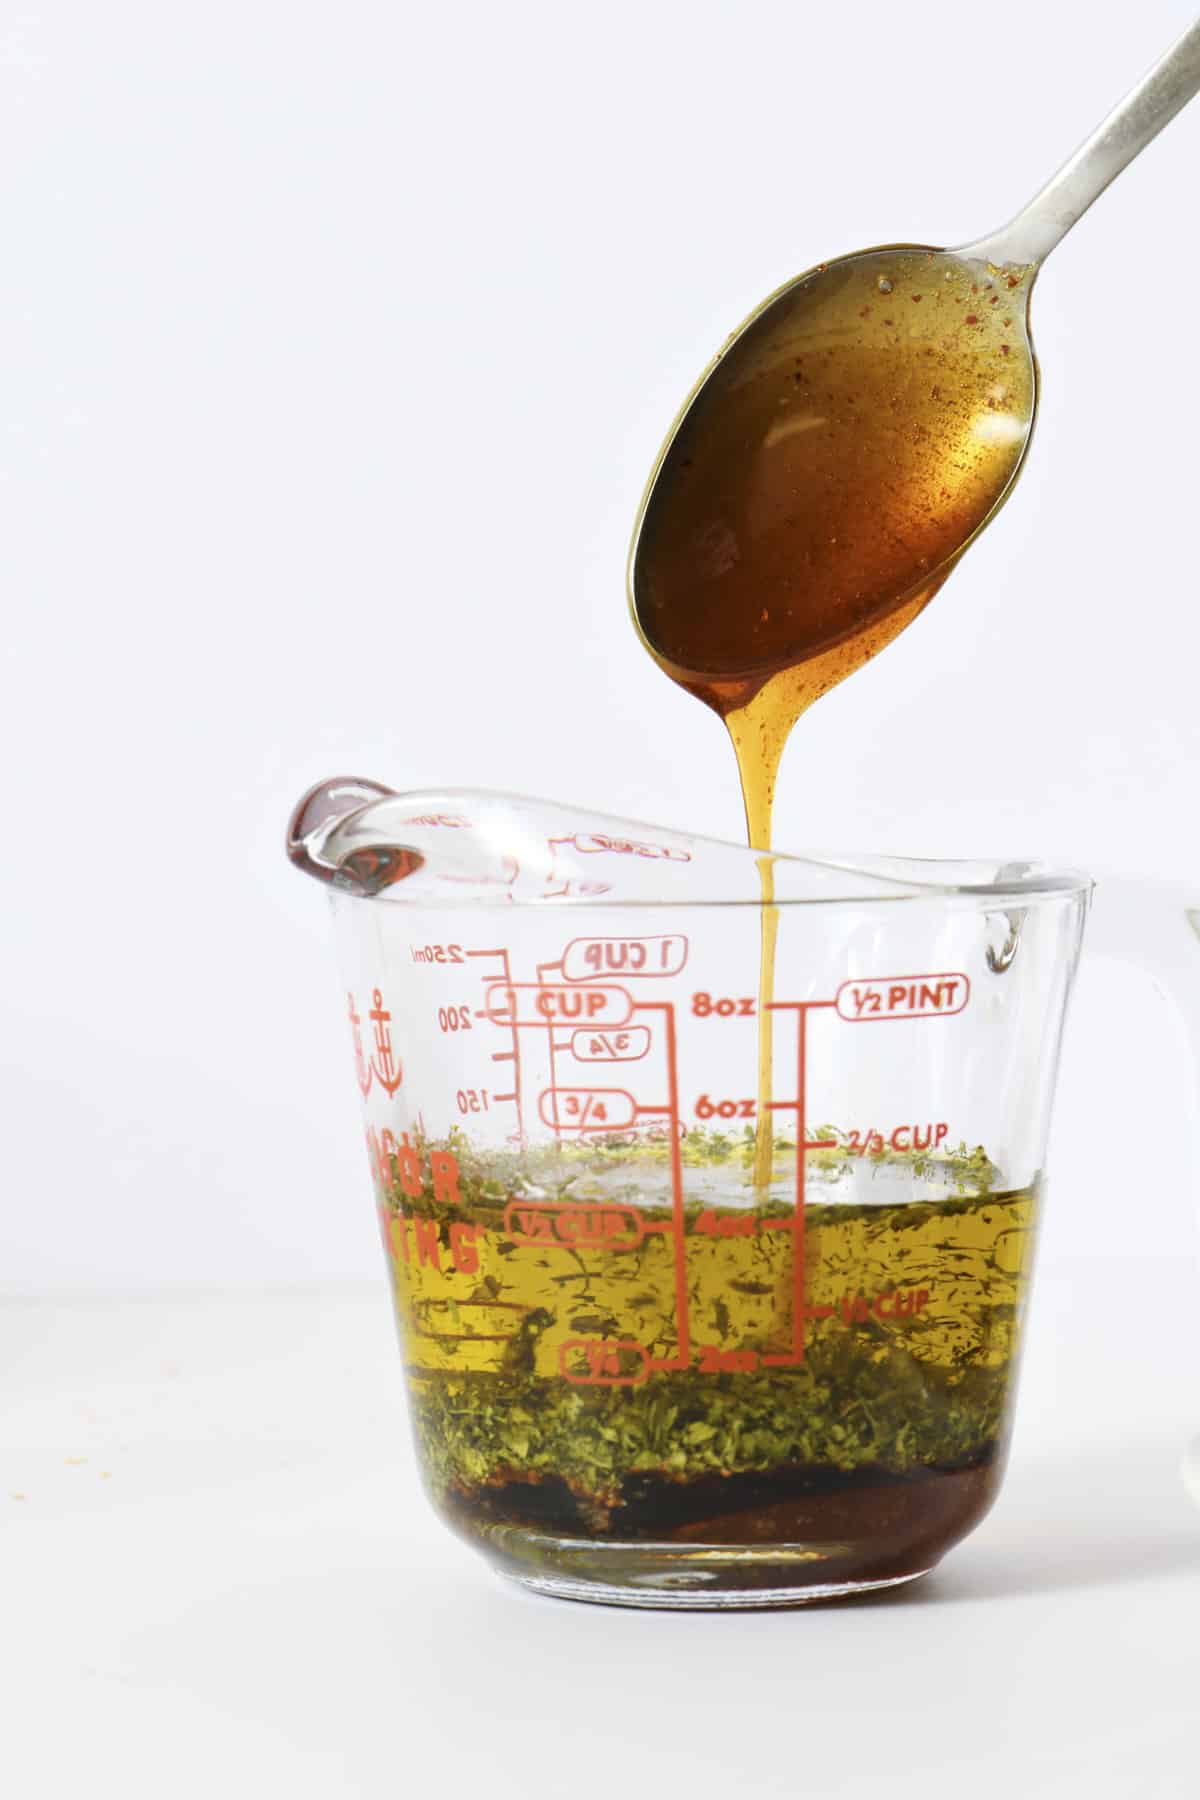 Spicy marinade for crackers in a glass measuring cup with a spoon.